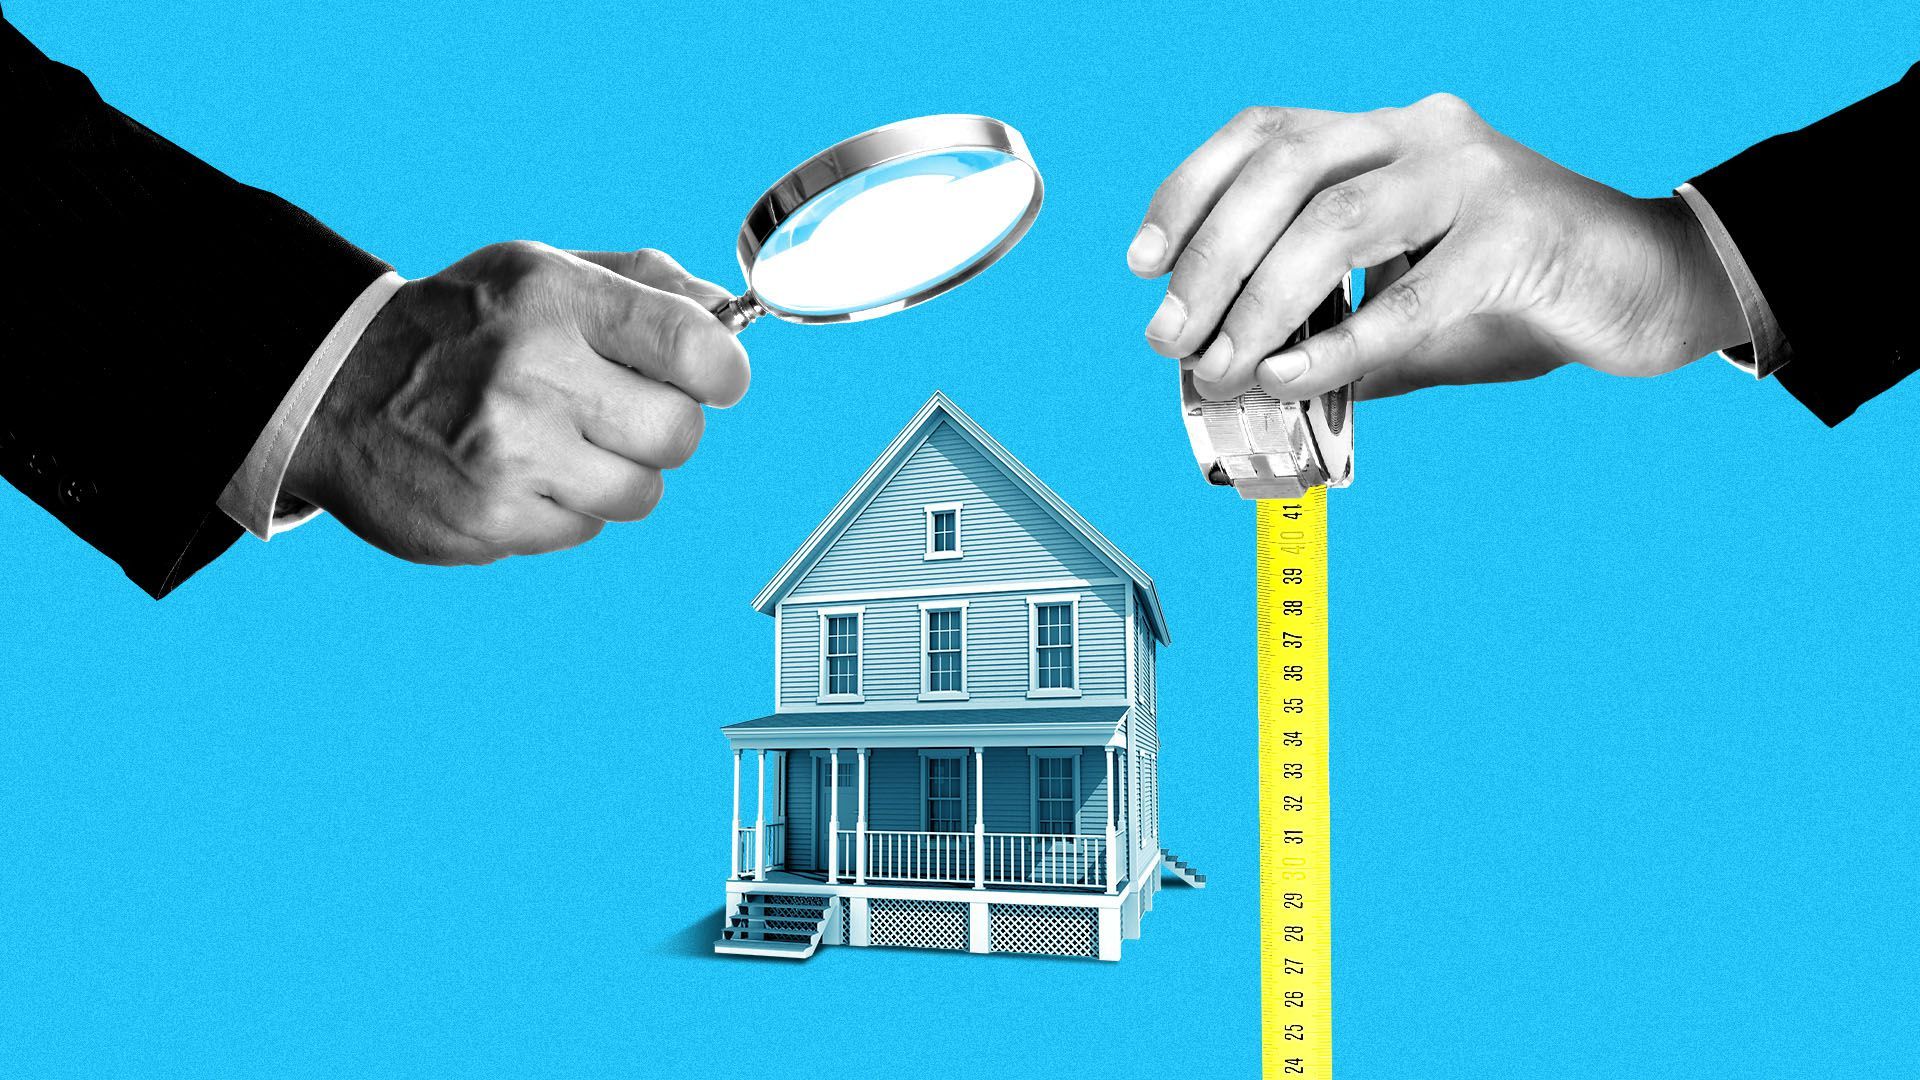 Illustration of a house being observed by a hand with a magnifying glass and another with a tape measure